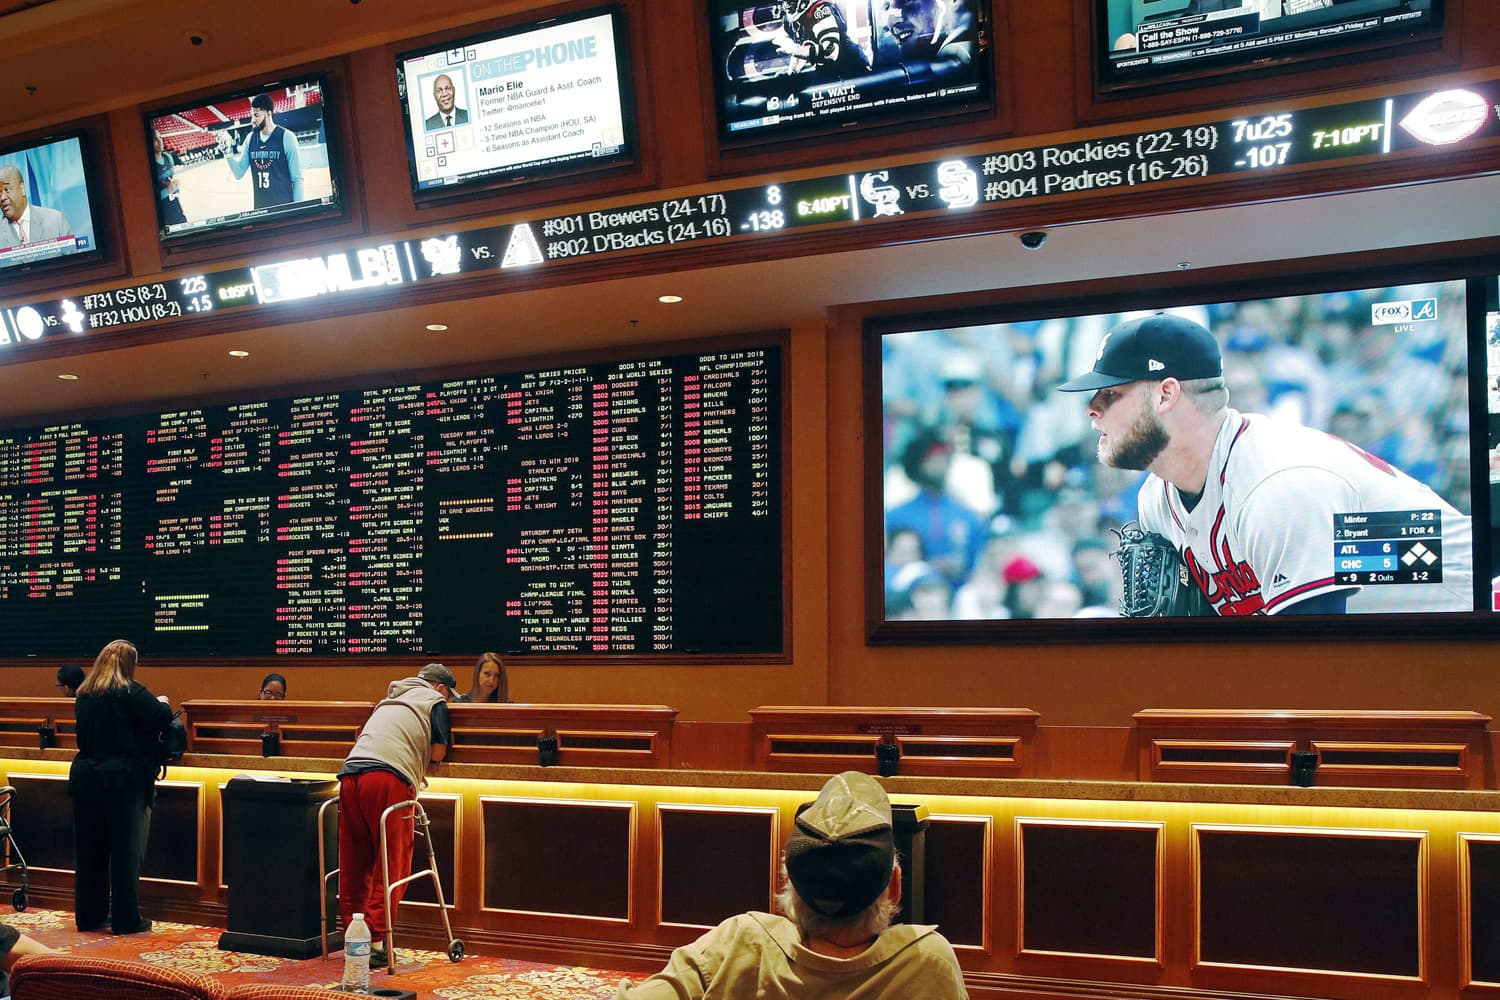    
How Does Sports Betting Work? 
